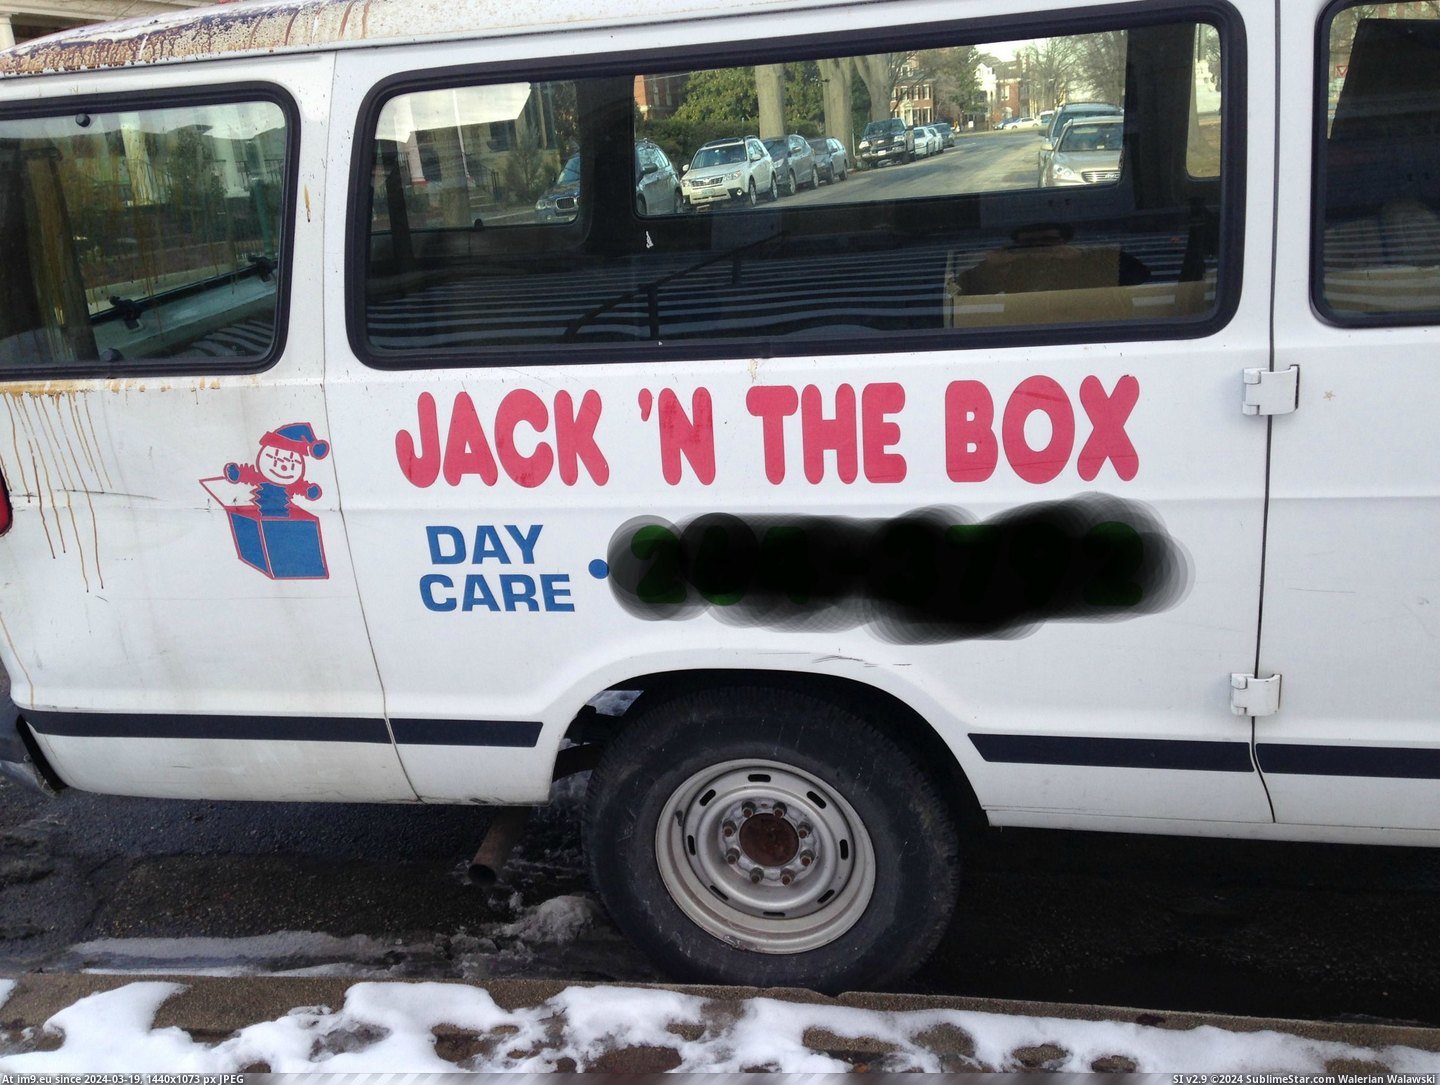 #Wtf #Saw #Town #Van [Wtf] A van I saw in my town. Something doesn't look right... 3 Pic. (Изображение из альбом My r/WTF favs))